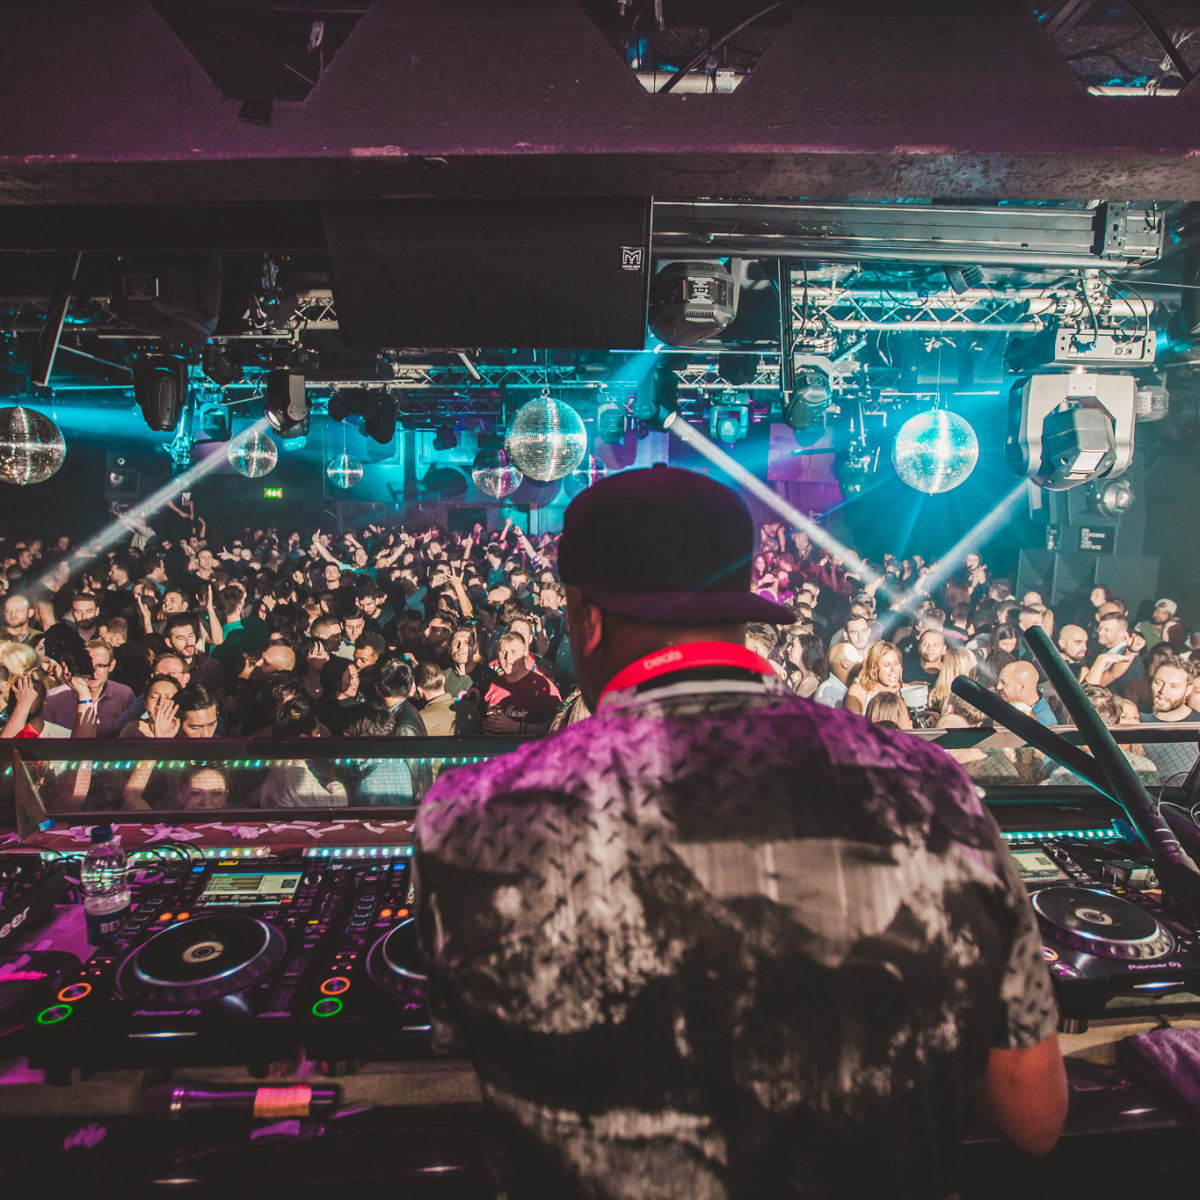 DESTINATION NIGHTCLUB: MINISTRY OF SOUND, LONDON  - The Latest  Electronic Dance Music News, Reviews & Artists